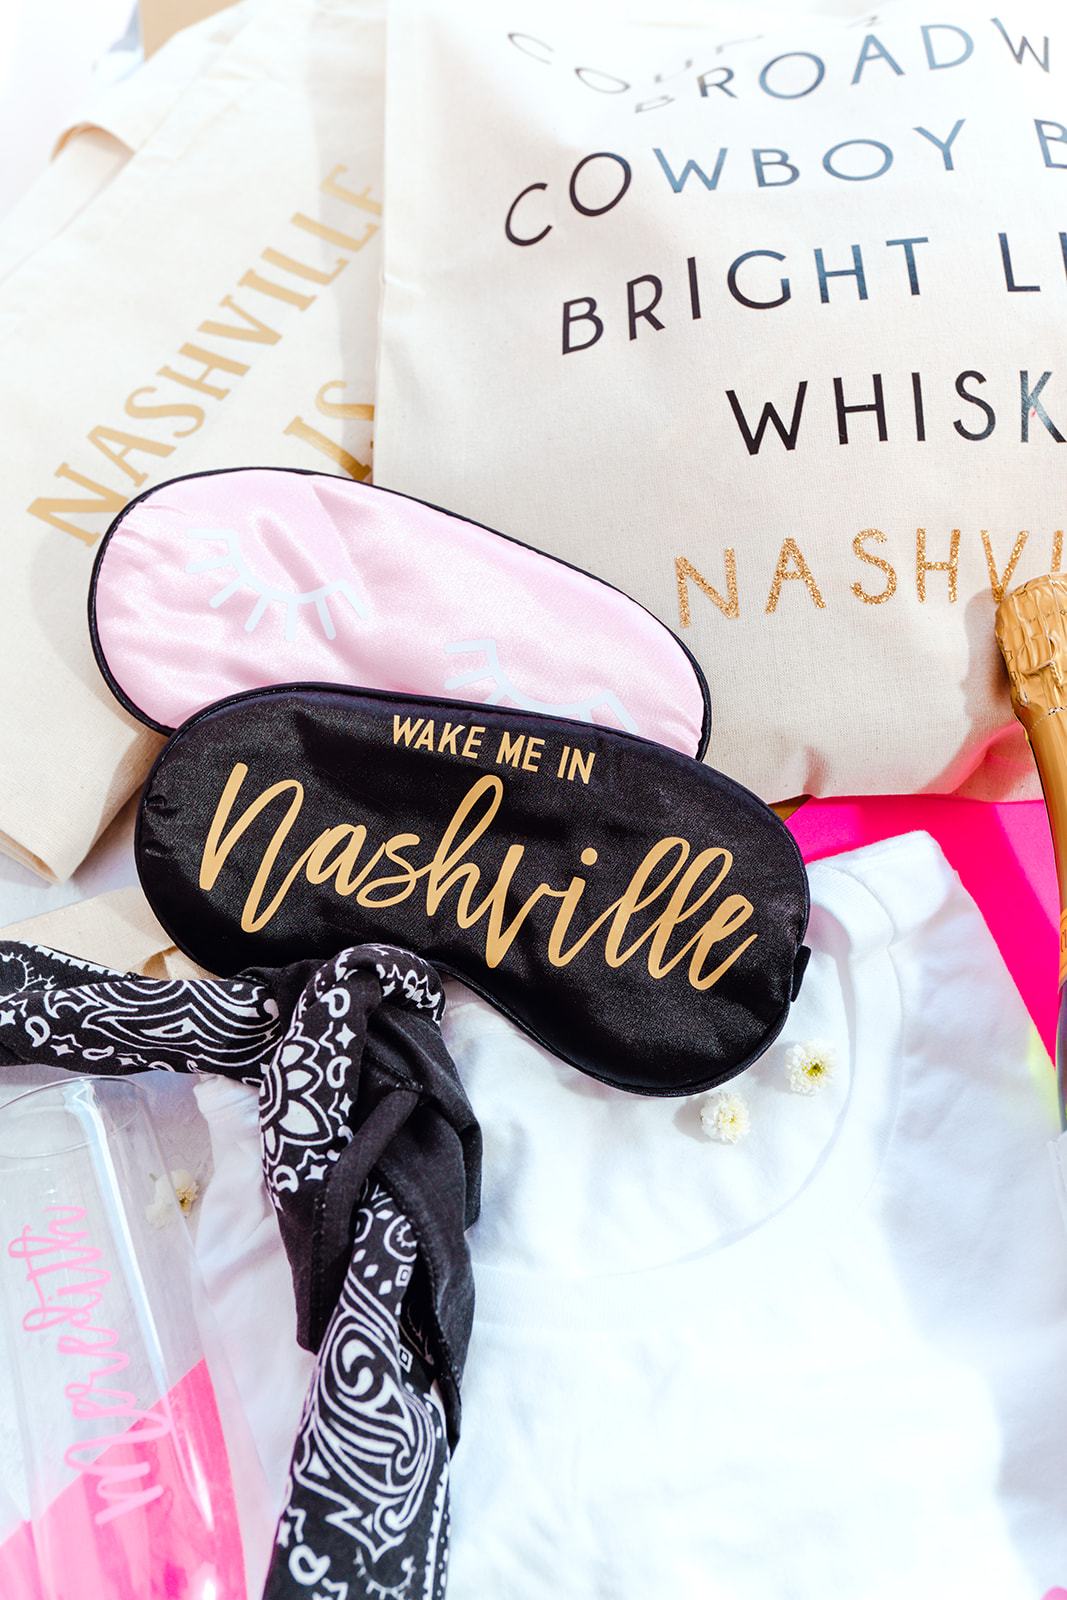 A black sleep mask is customized with a gold design that says "Wake Me In Nashville".